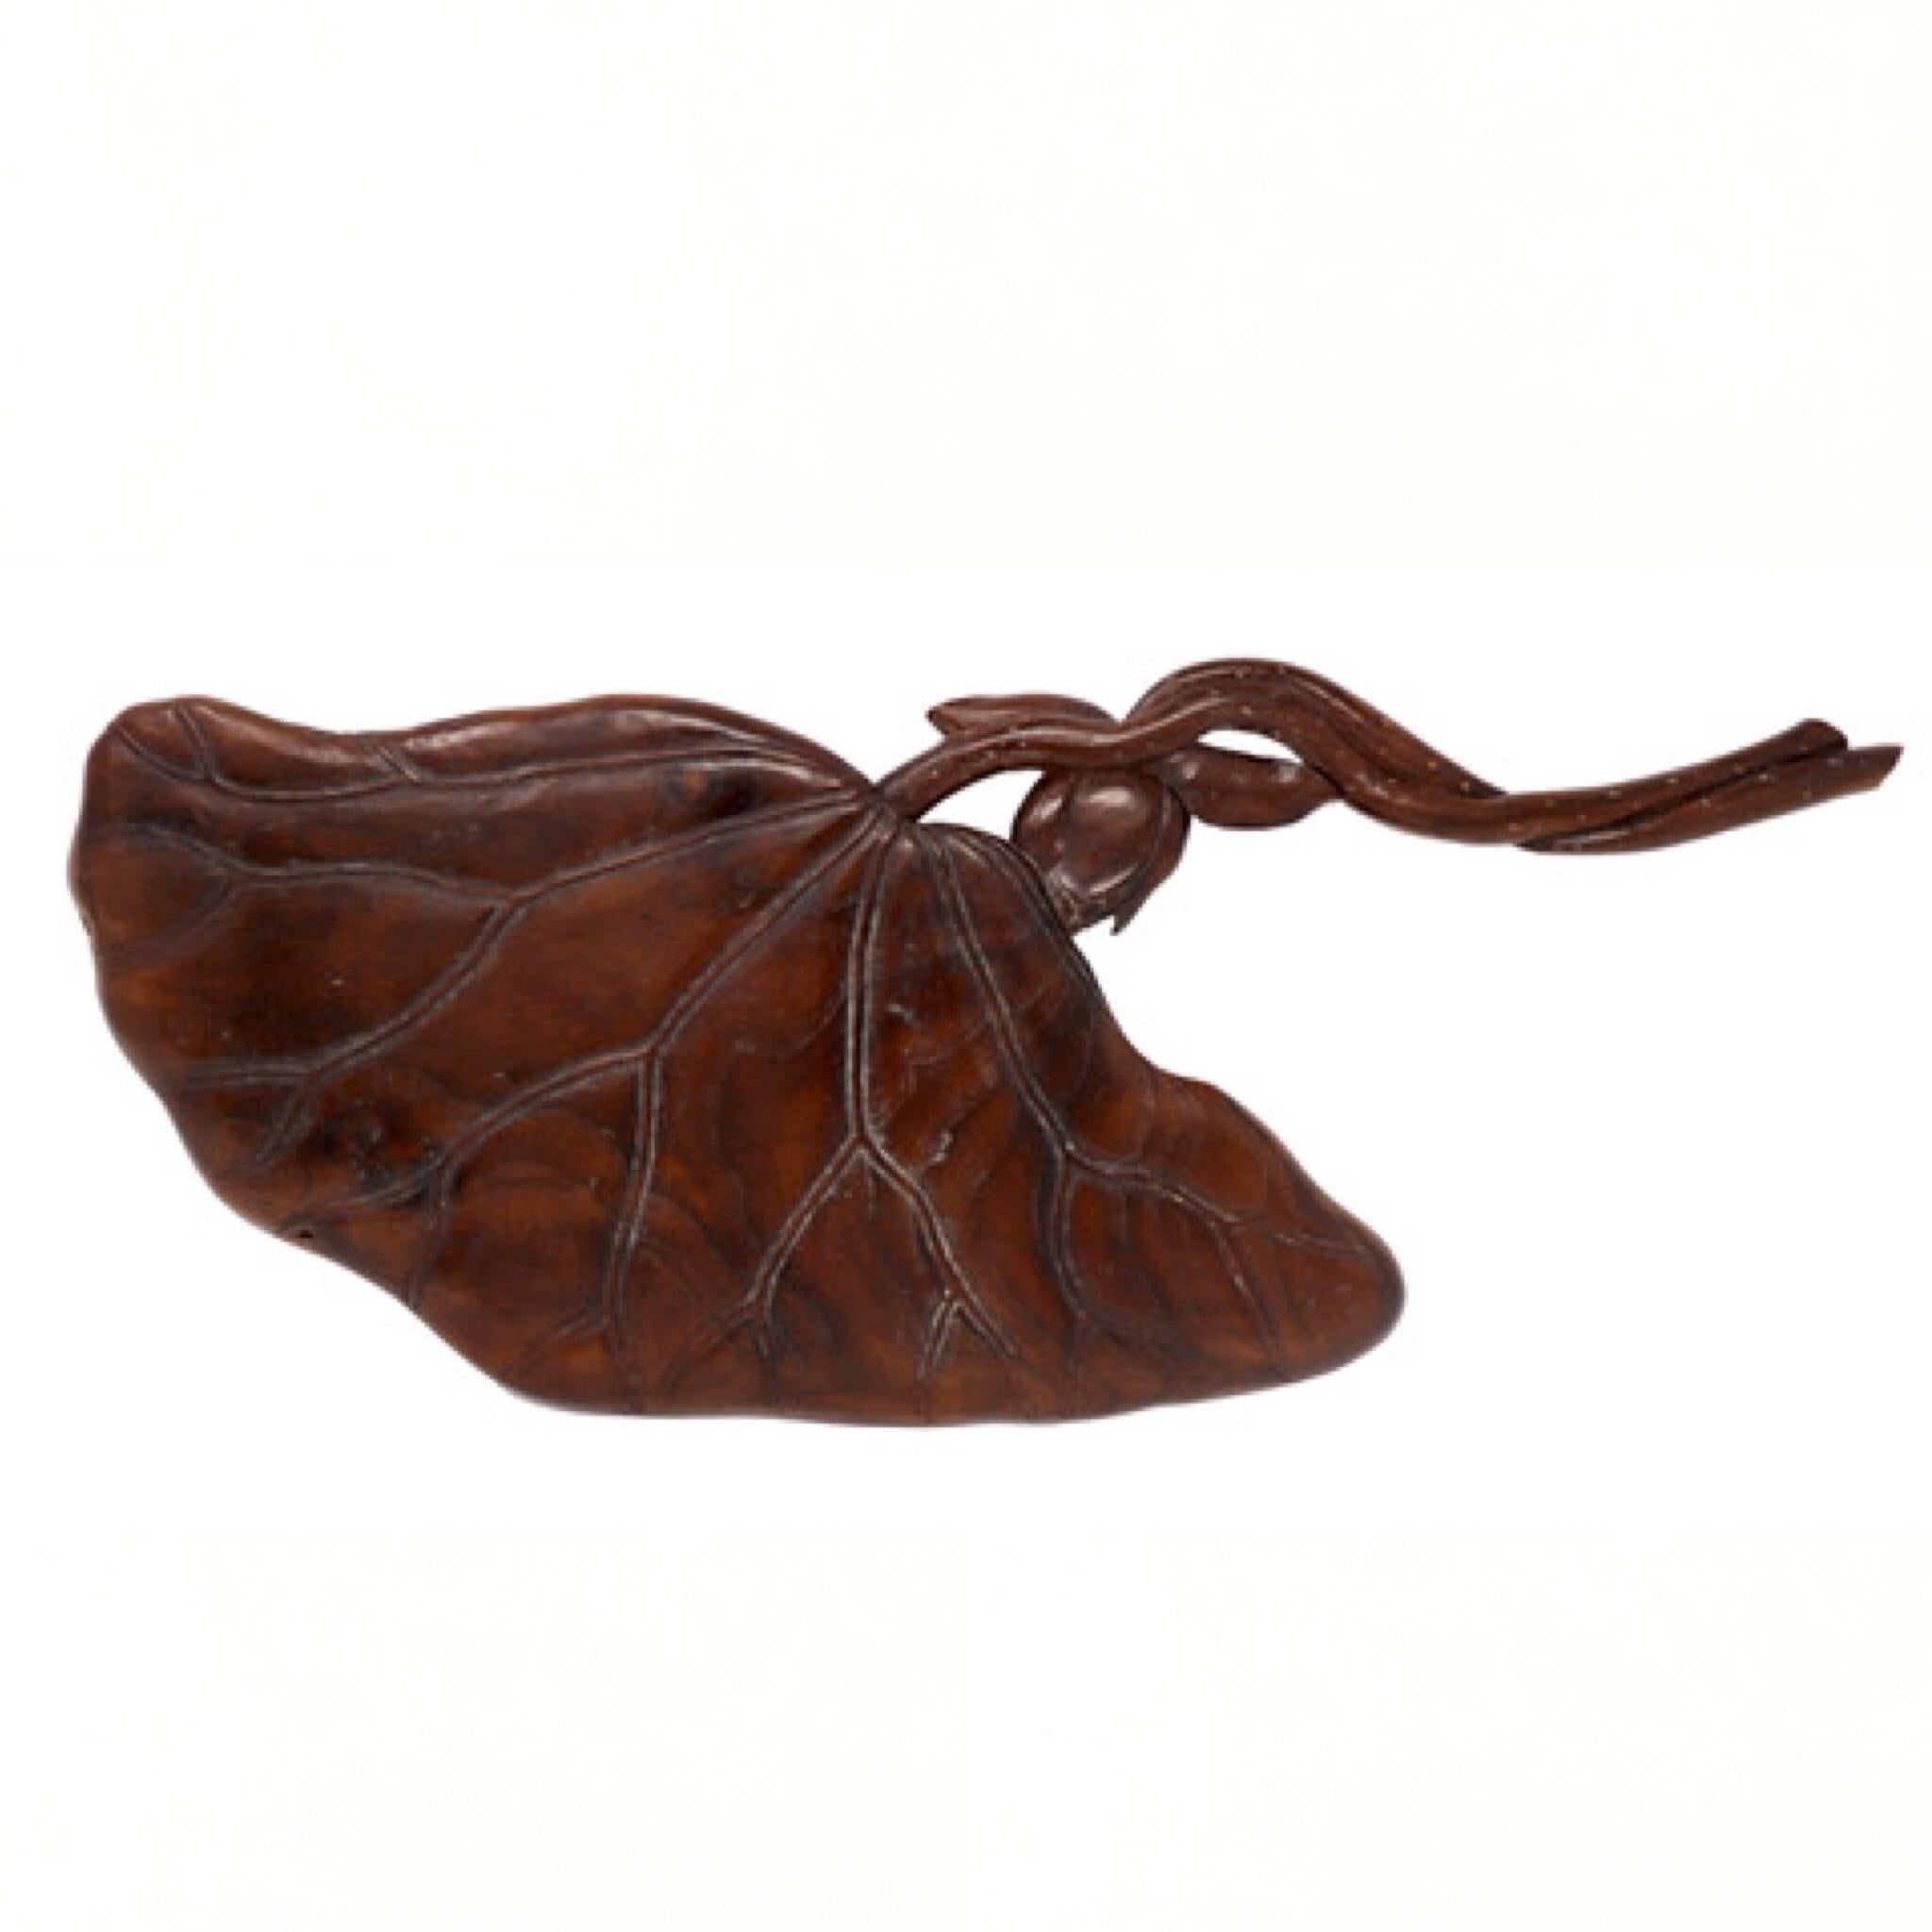 Lotus Leaf Shaped Japanese Carved Wood Tea Tray In Good Condition For Sale In New York, NY